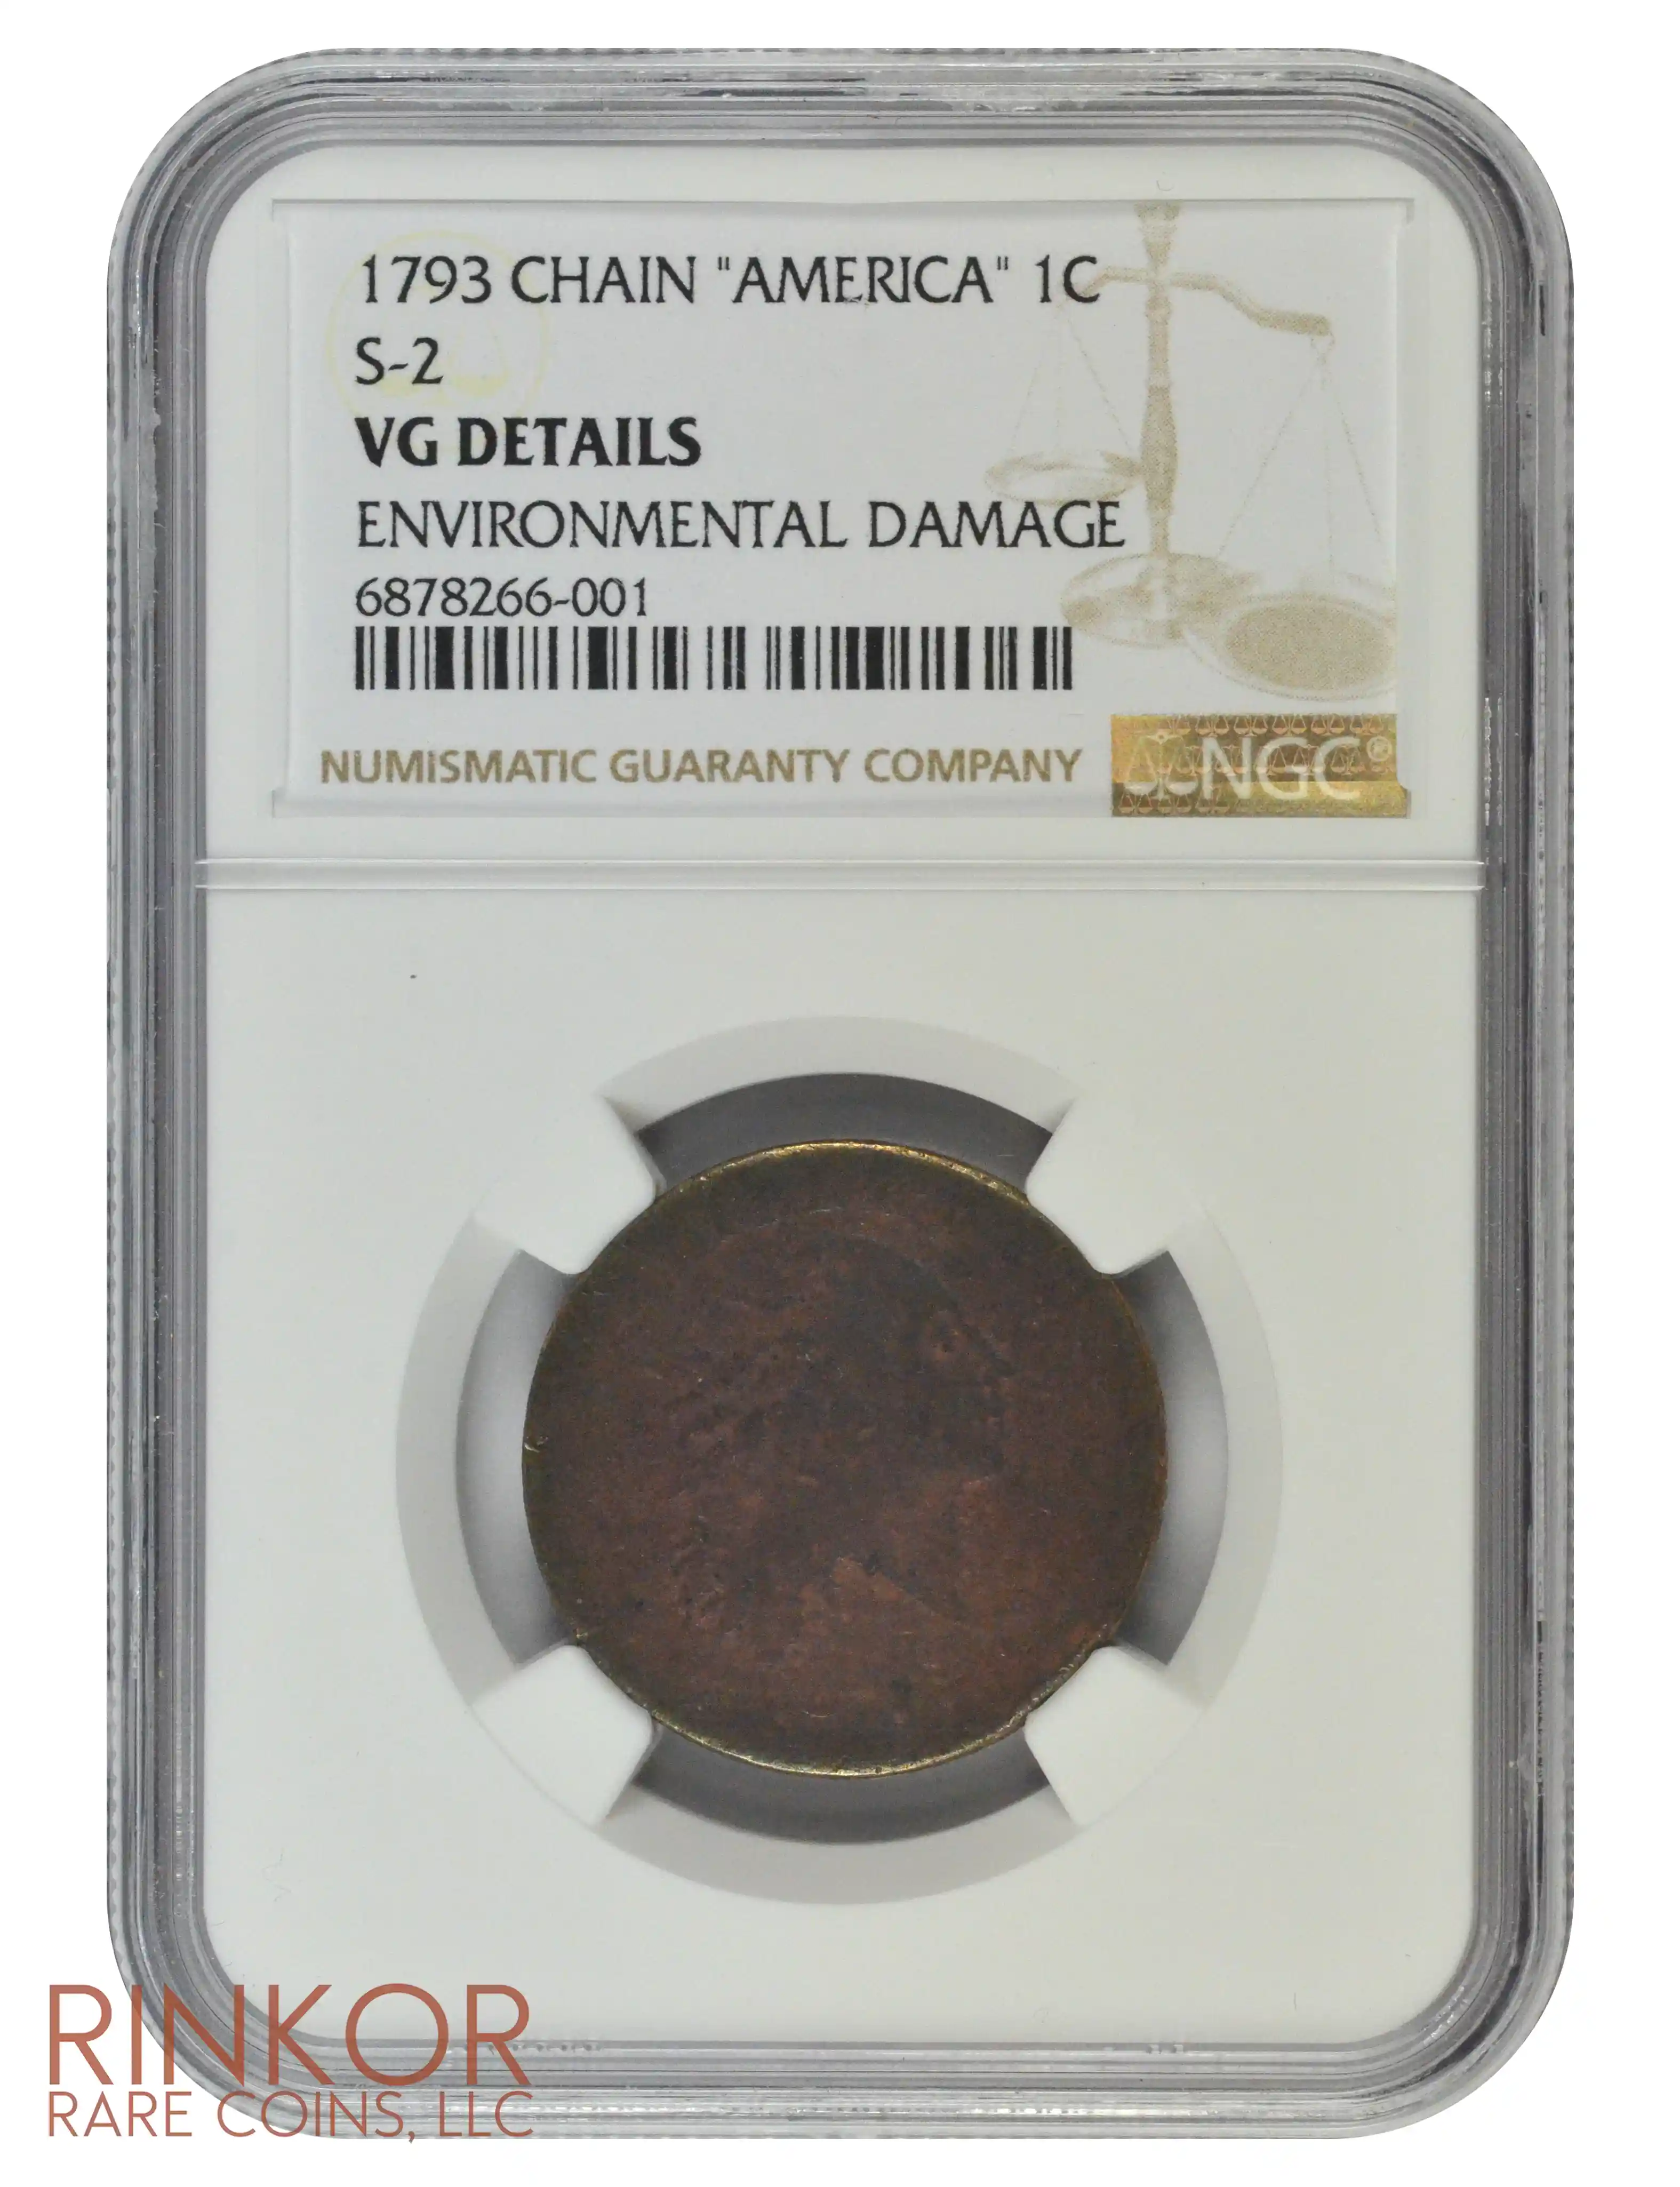 1793 Chain Cent America S-2 NGC VG Details